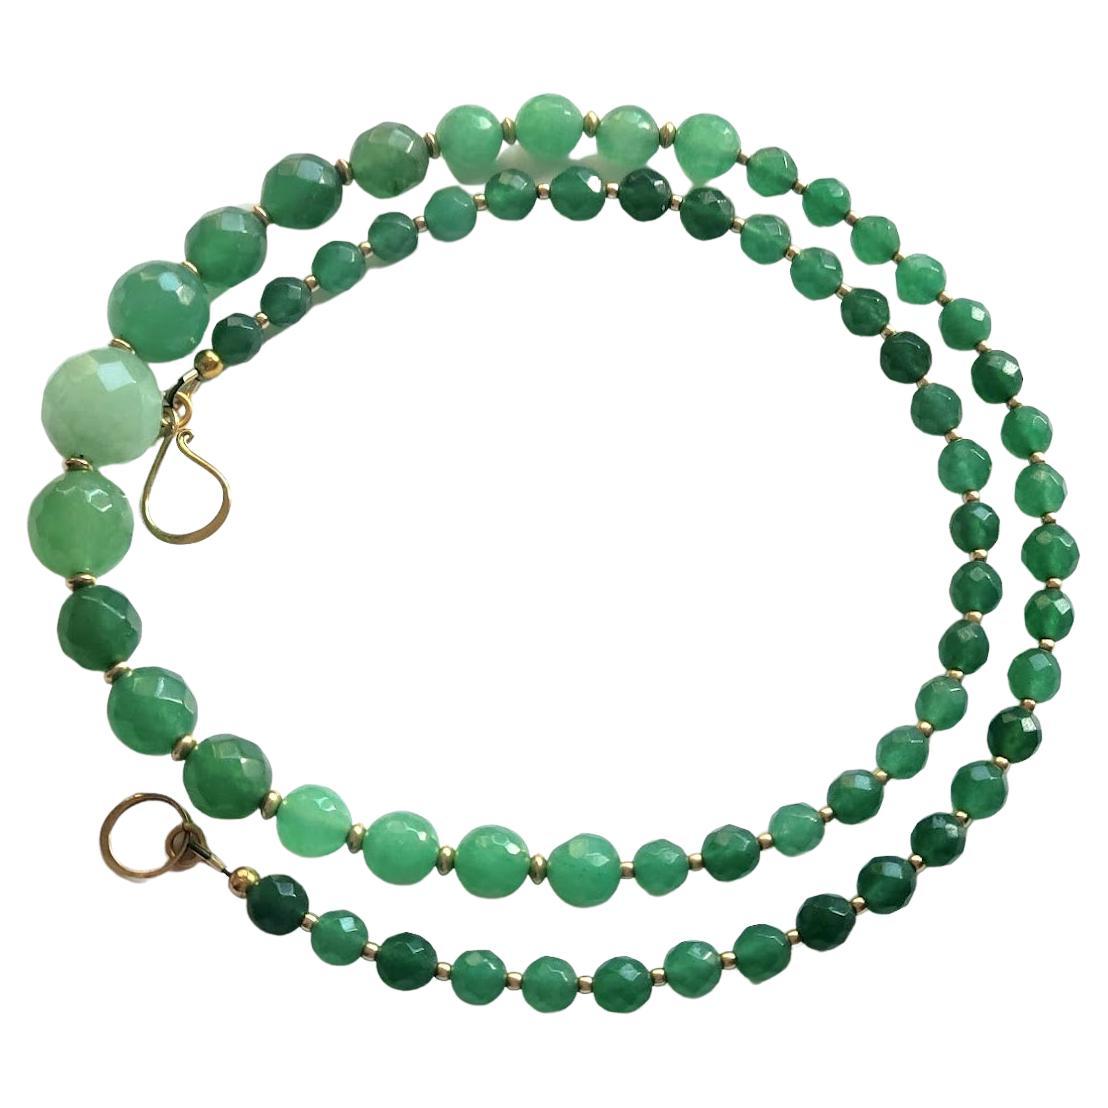 Green Beryl Emerald Necklace For Sale